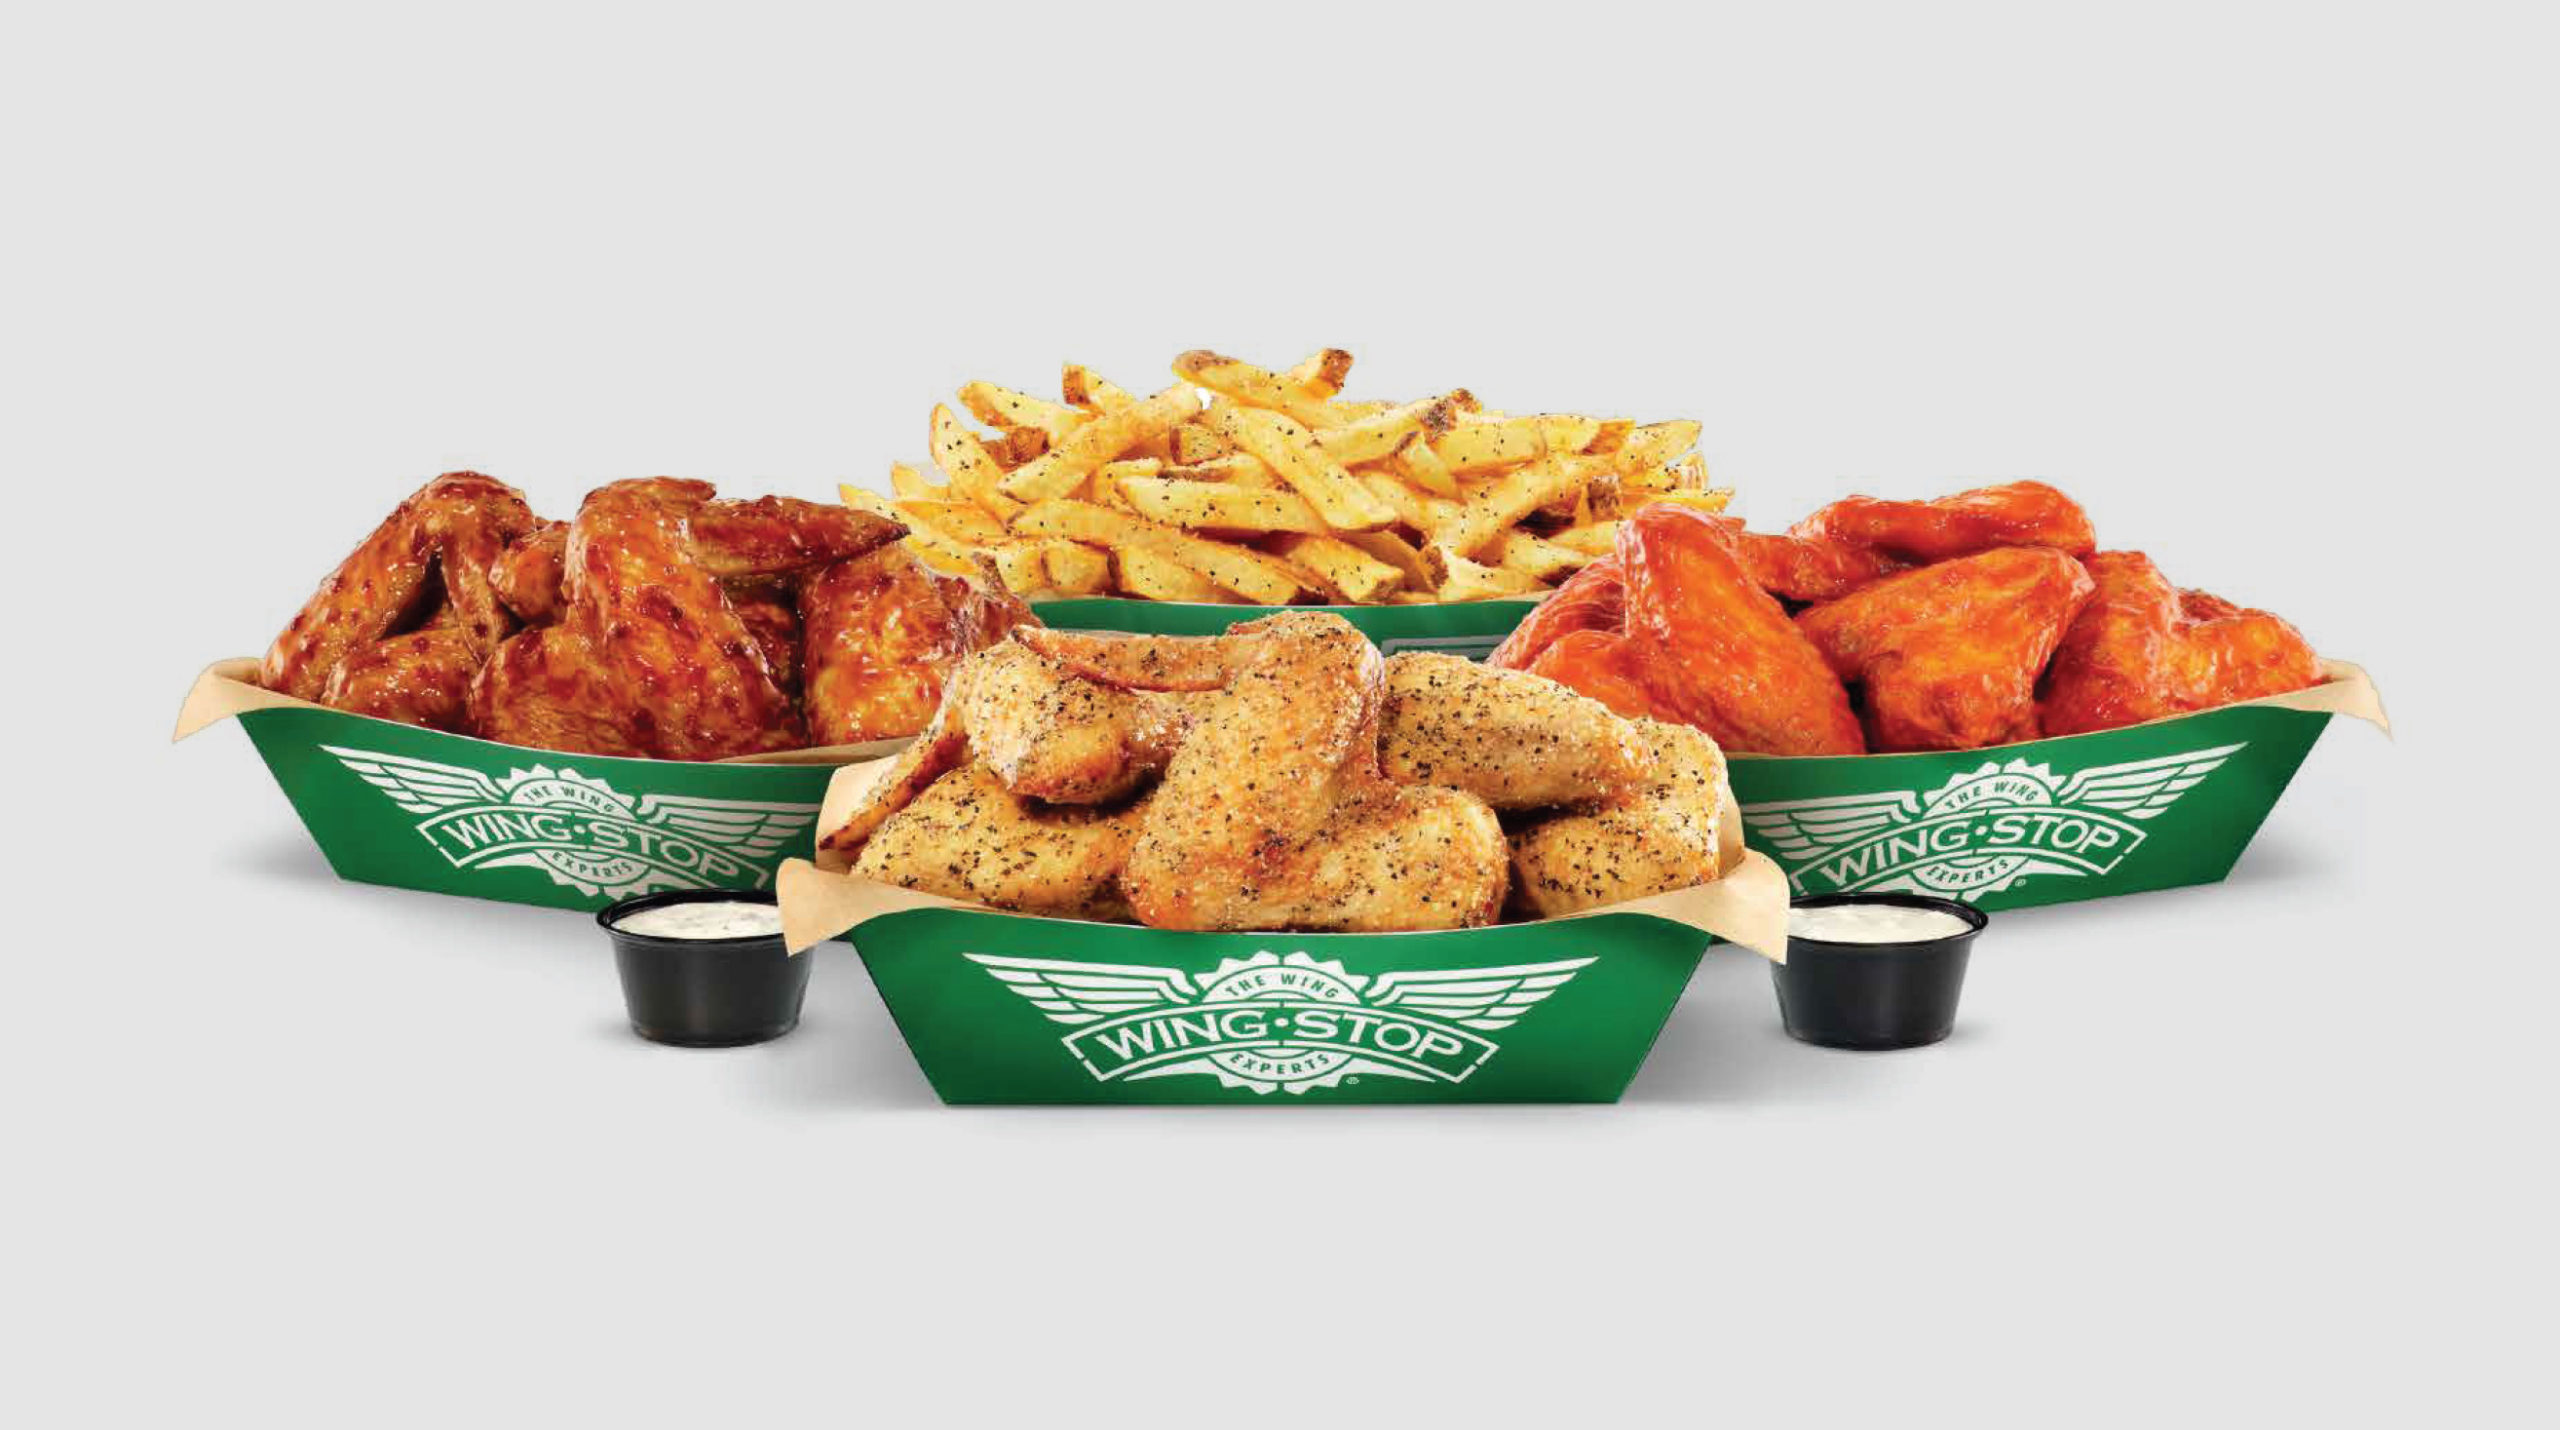 IMS enables Wingstop’s Growth with End-to-End Retail Marketing Execution